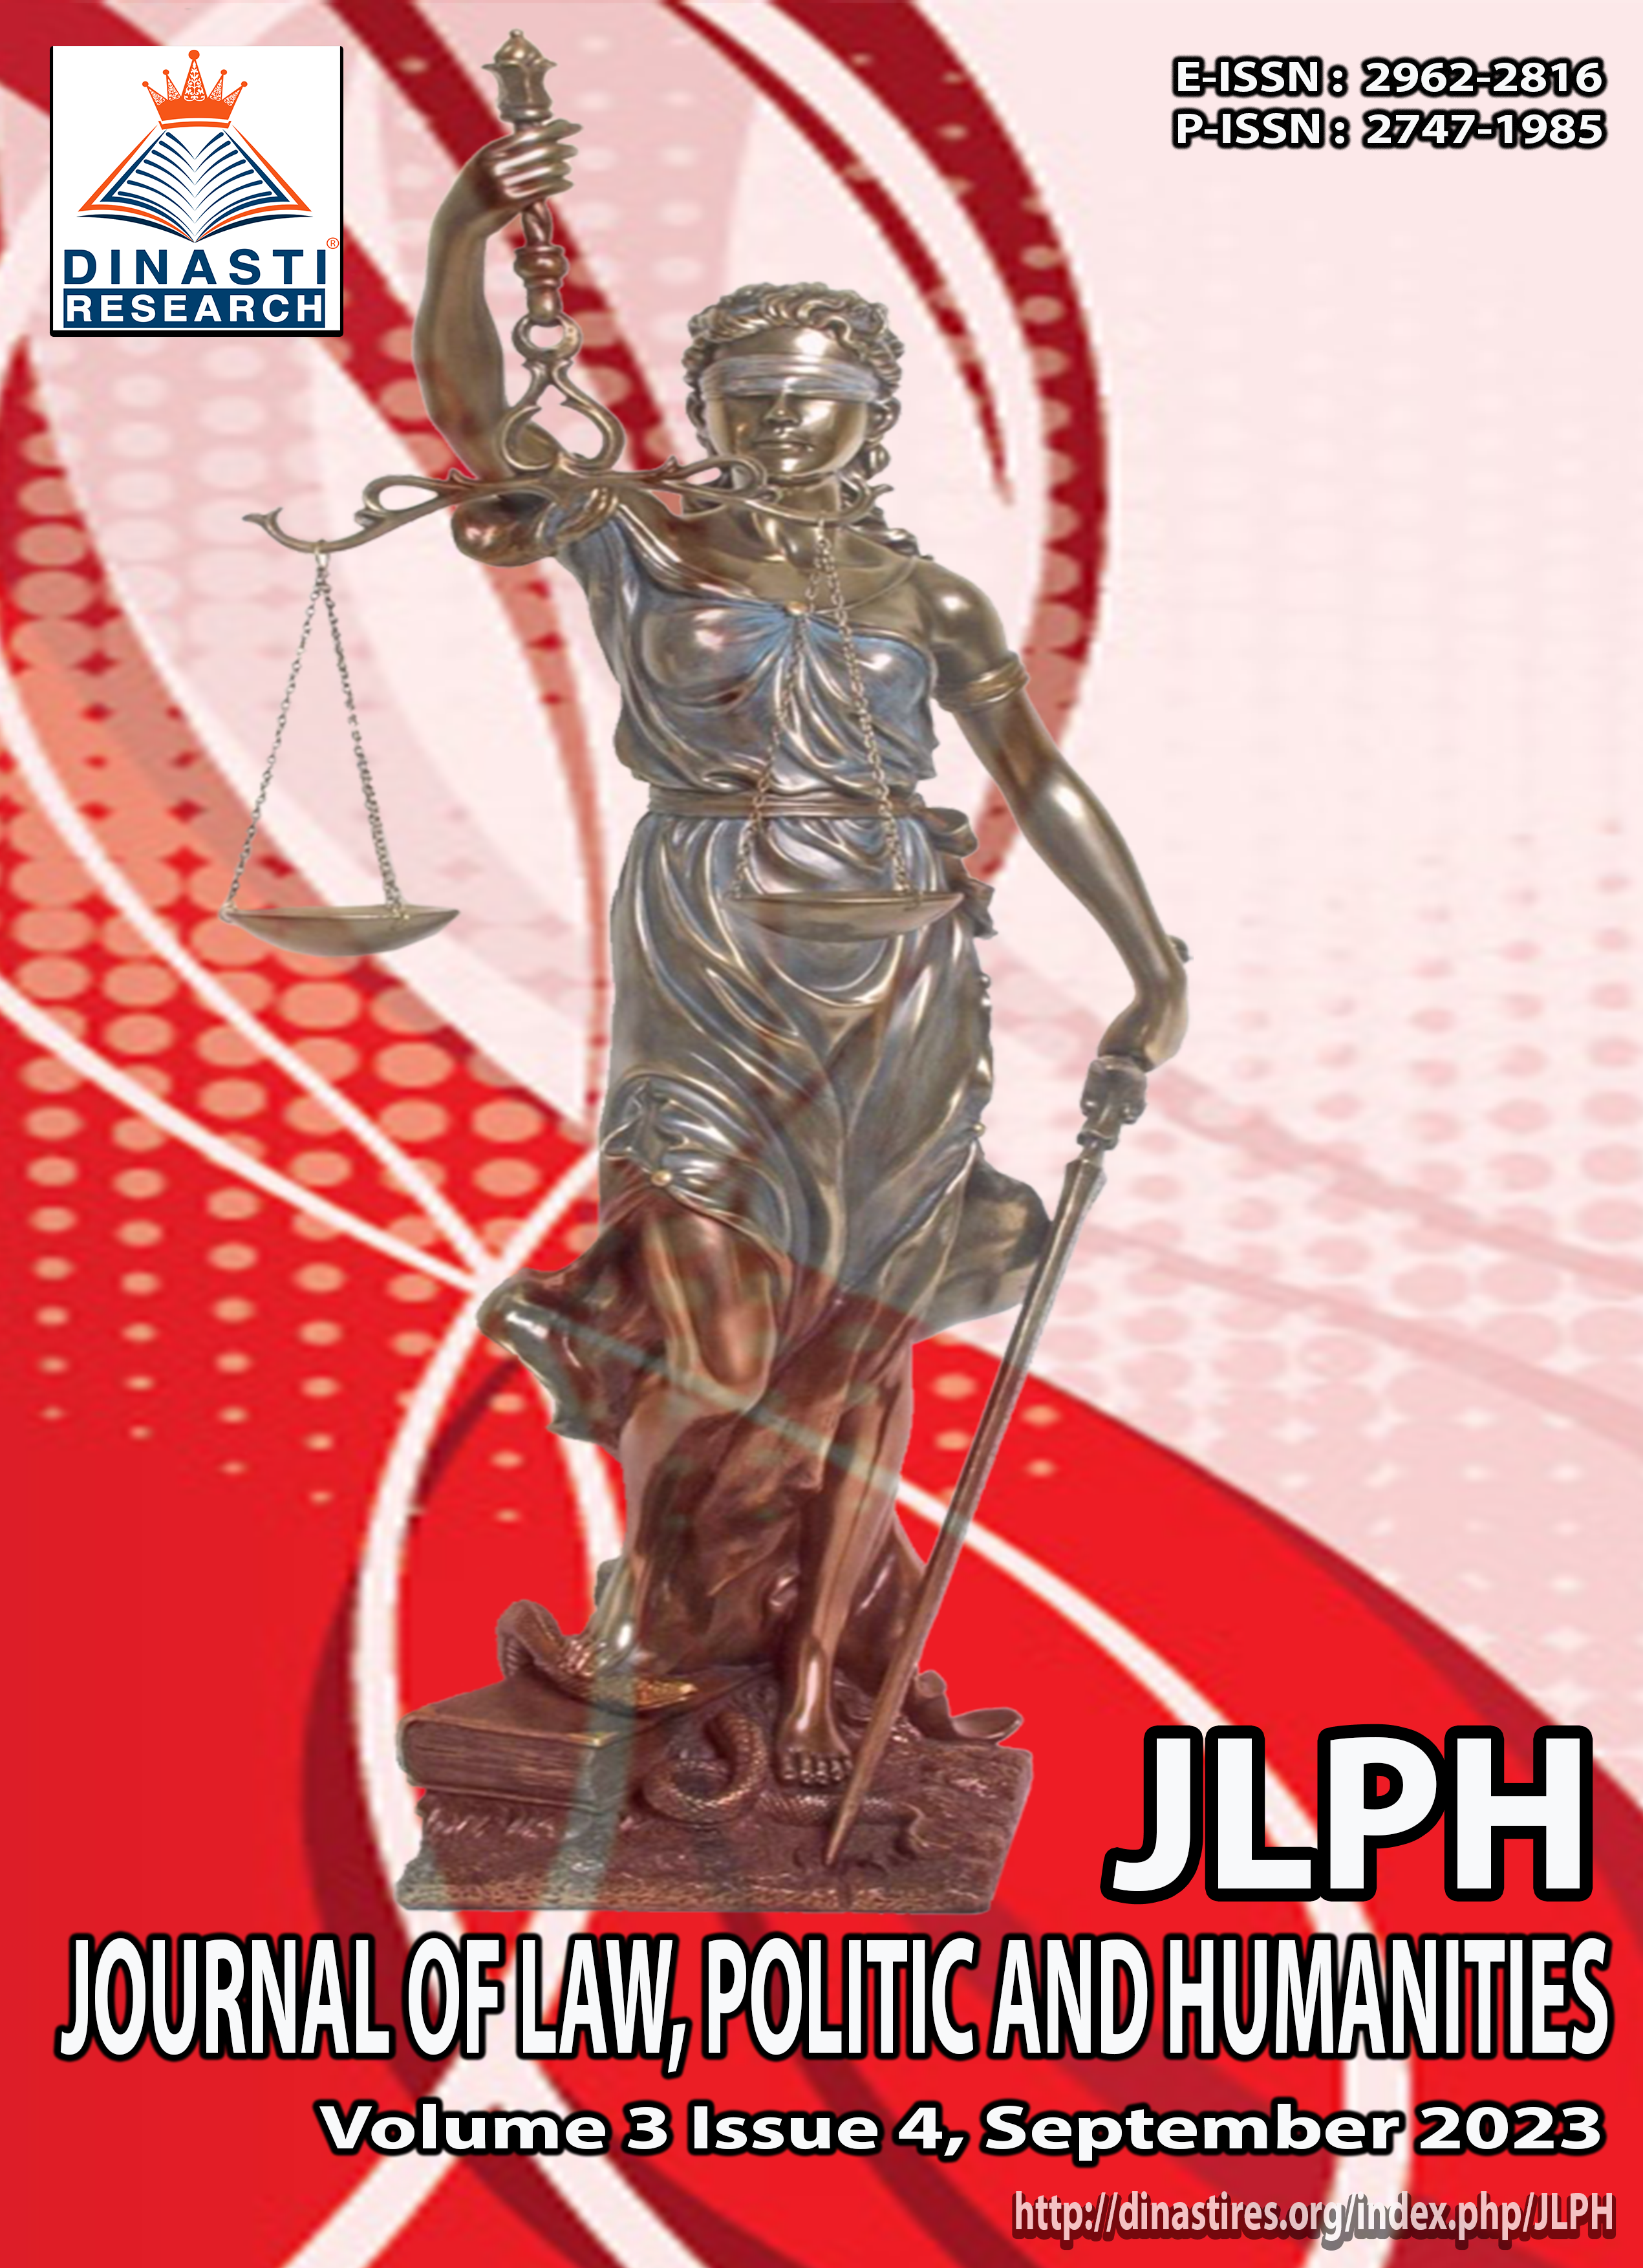 					View Vol. 3 No. 4 (2023): (JLPH) Journal of Law, Politic and Humanities (August 2023)
				